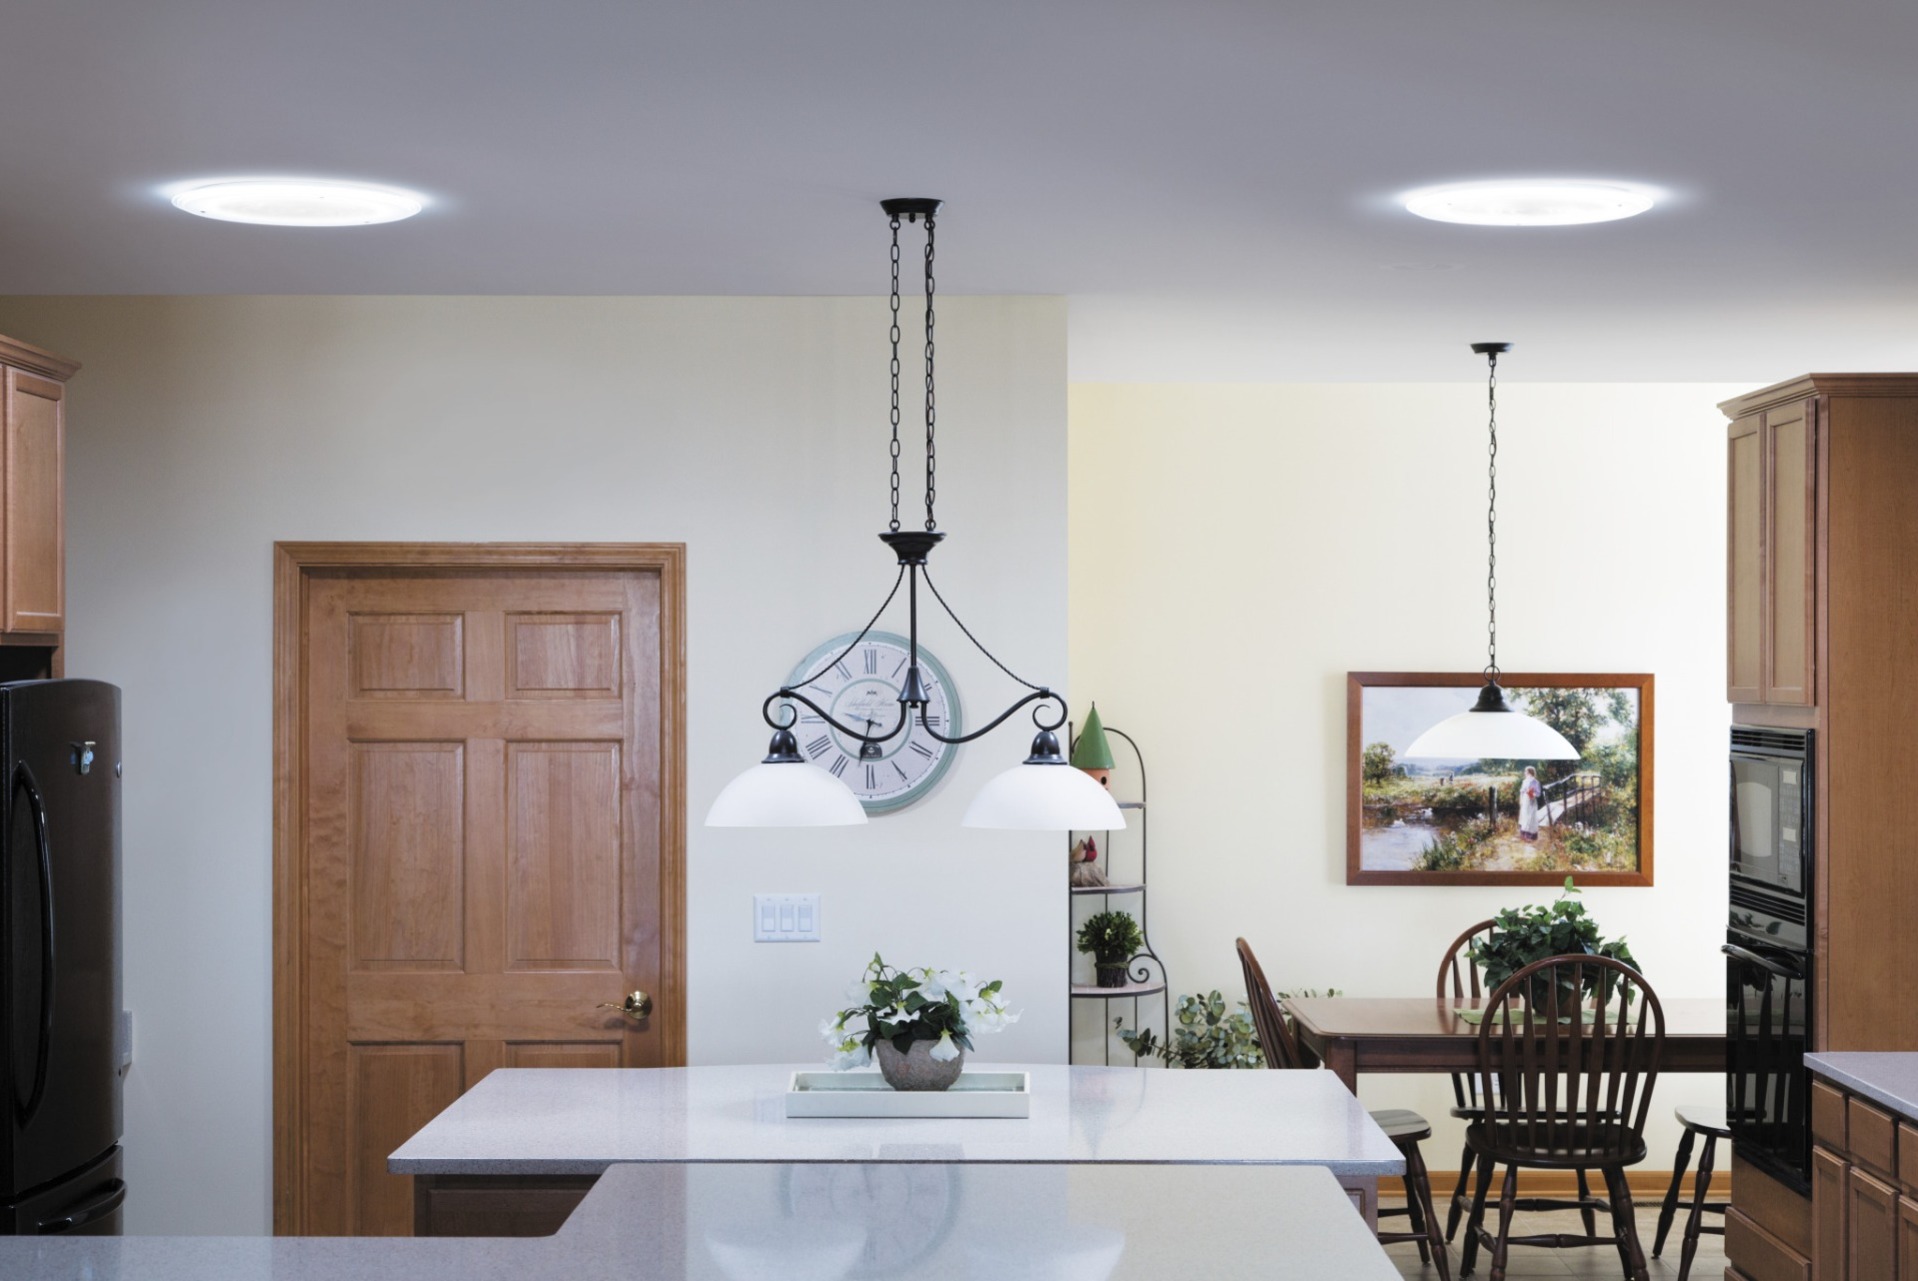 Kitchen example with 2 Daylighting Systems